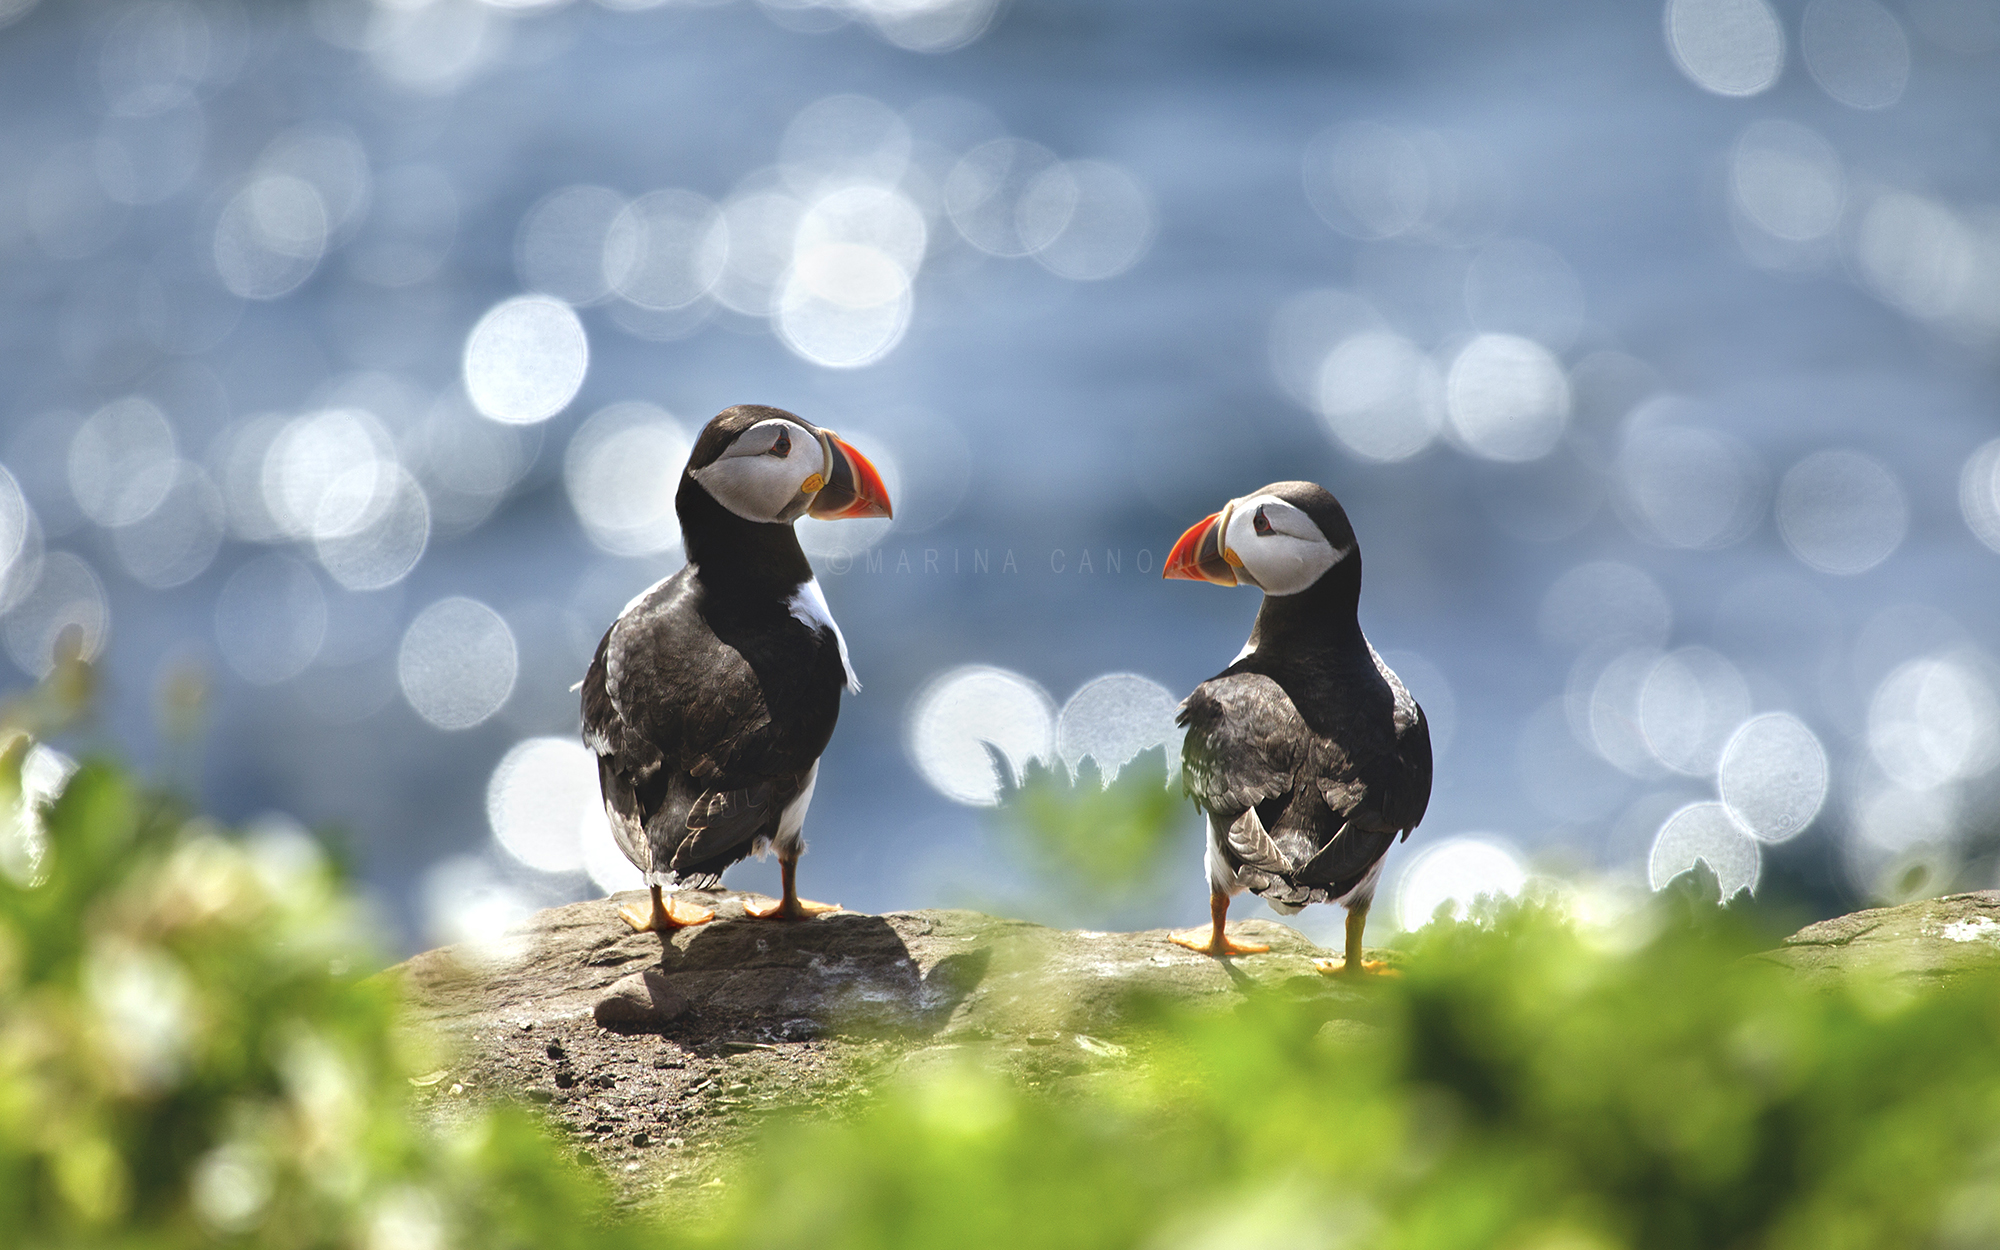 37 Photos Of Precious Puffins That Will Melt Your Heart